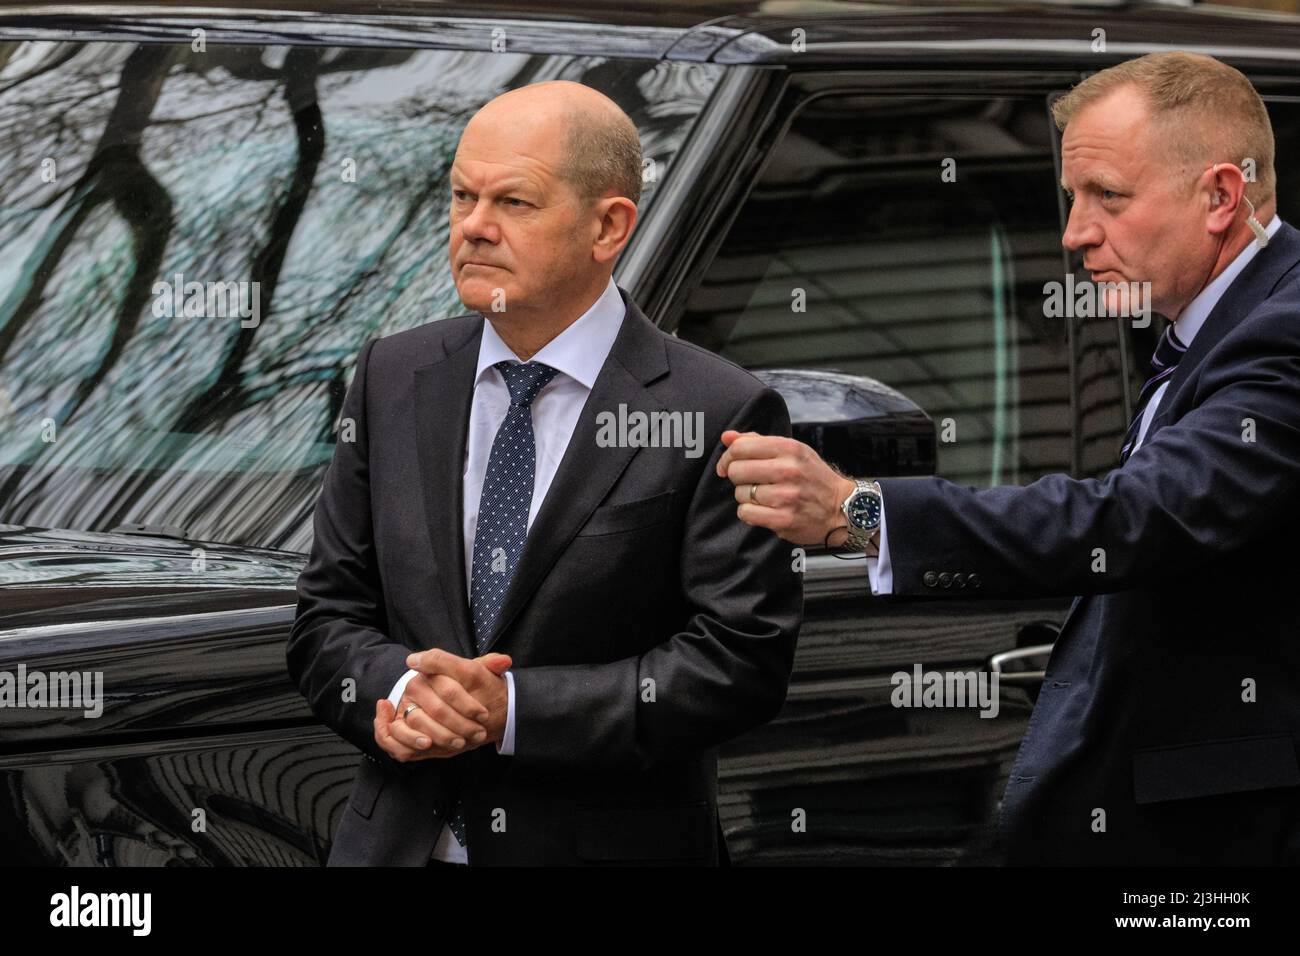 Westminster, London, UK. 08th Apr, 2022. Olaf Scholz arrives. Boris Johnson MP, British Prime Minister welcomes German Chancellor Olaf Scholz today at Downing Street for meetings to discuss the situation in Ukraine as well as international and bilateral topics. Credit: Imageplotter/Alamy Live News Stock Photo